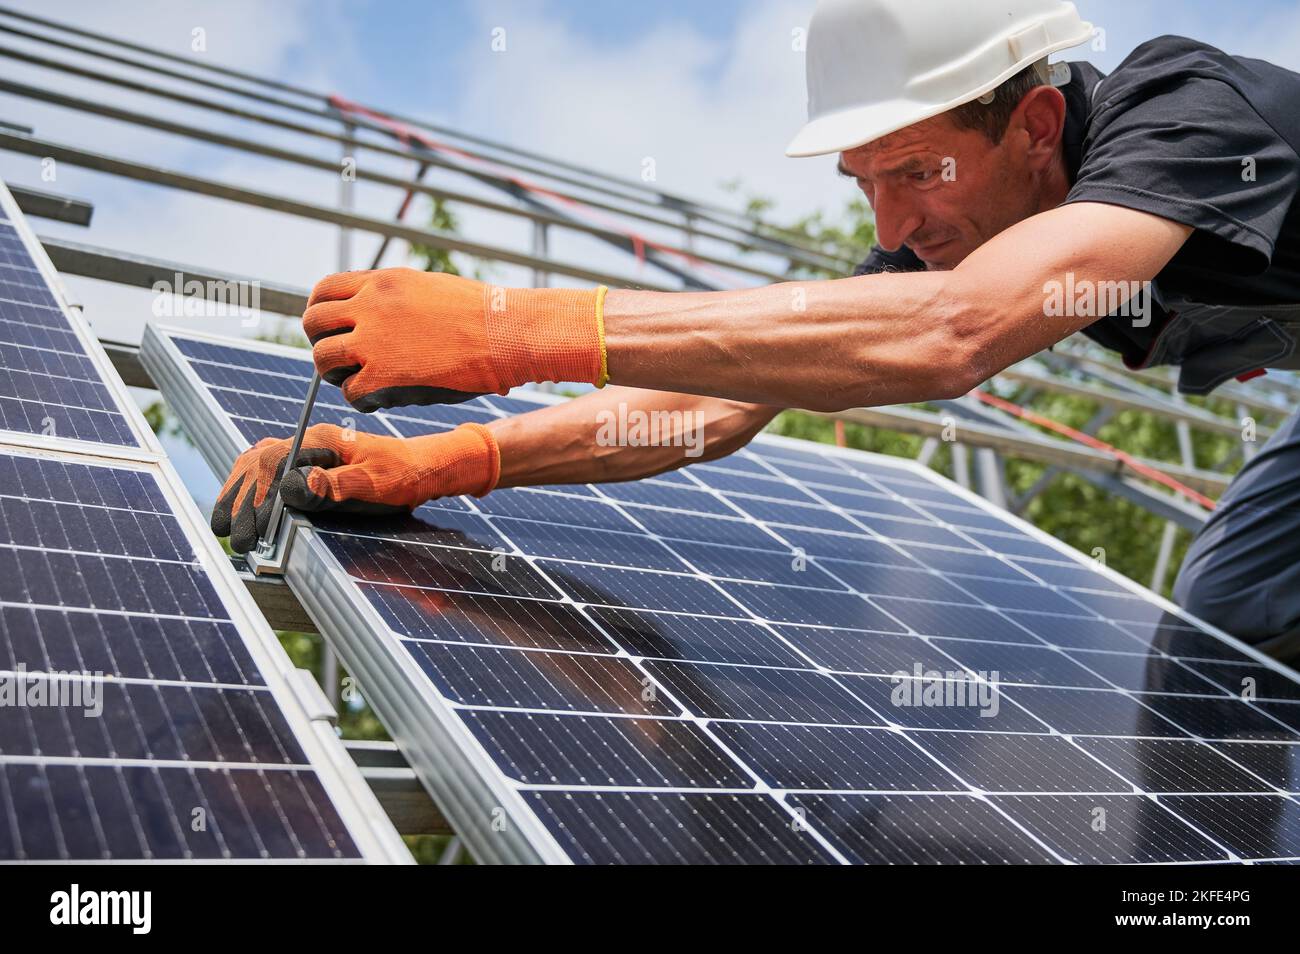 Close up of man installer placing solar module on metal rails. Male worker mounting photovoltaic solar panel system outdoors, wearing construction helmet and work gloves. Stock Photo